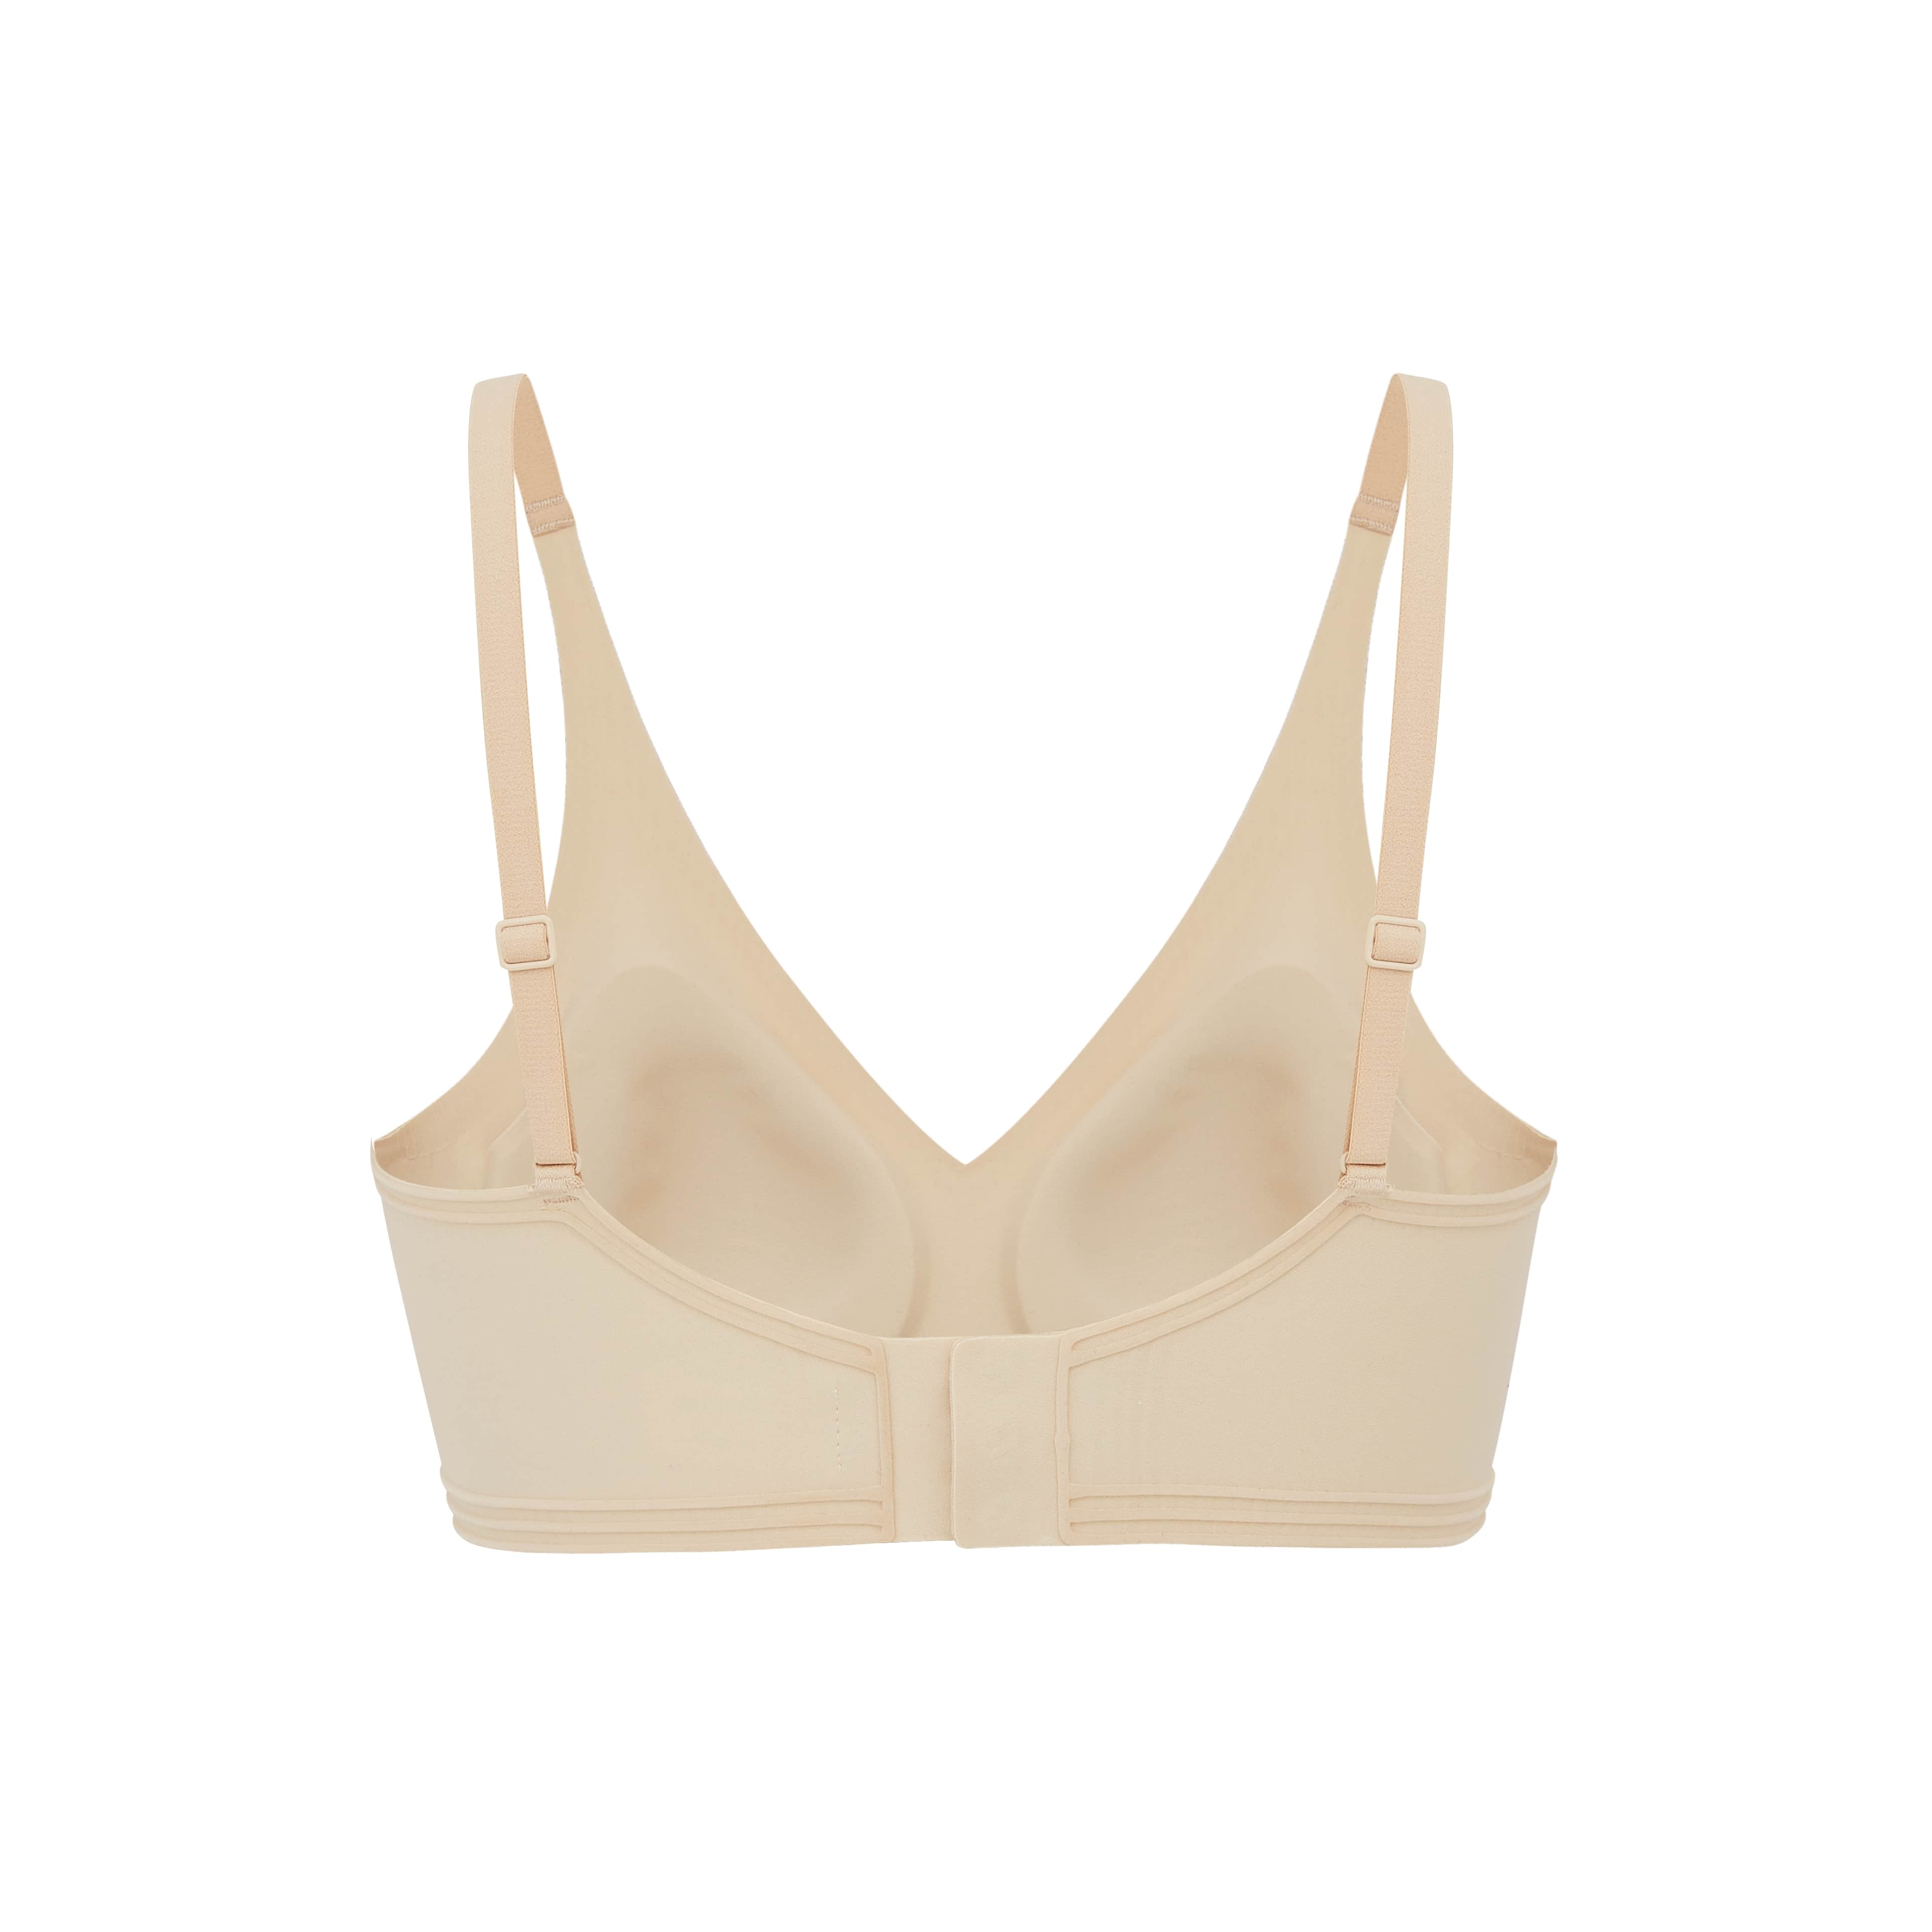 Interior flat lay image of beige bra with plunge neckline and back clasp